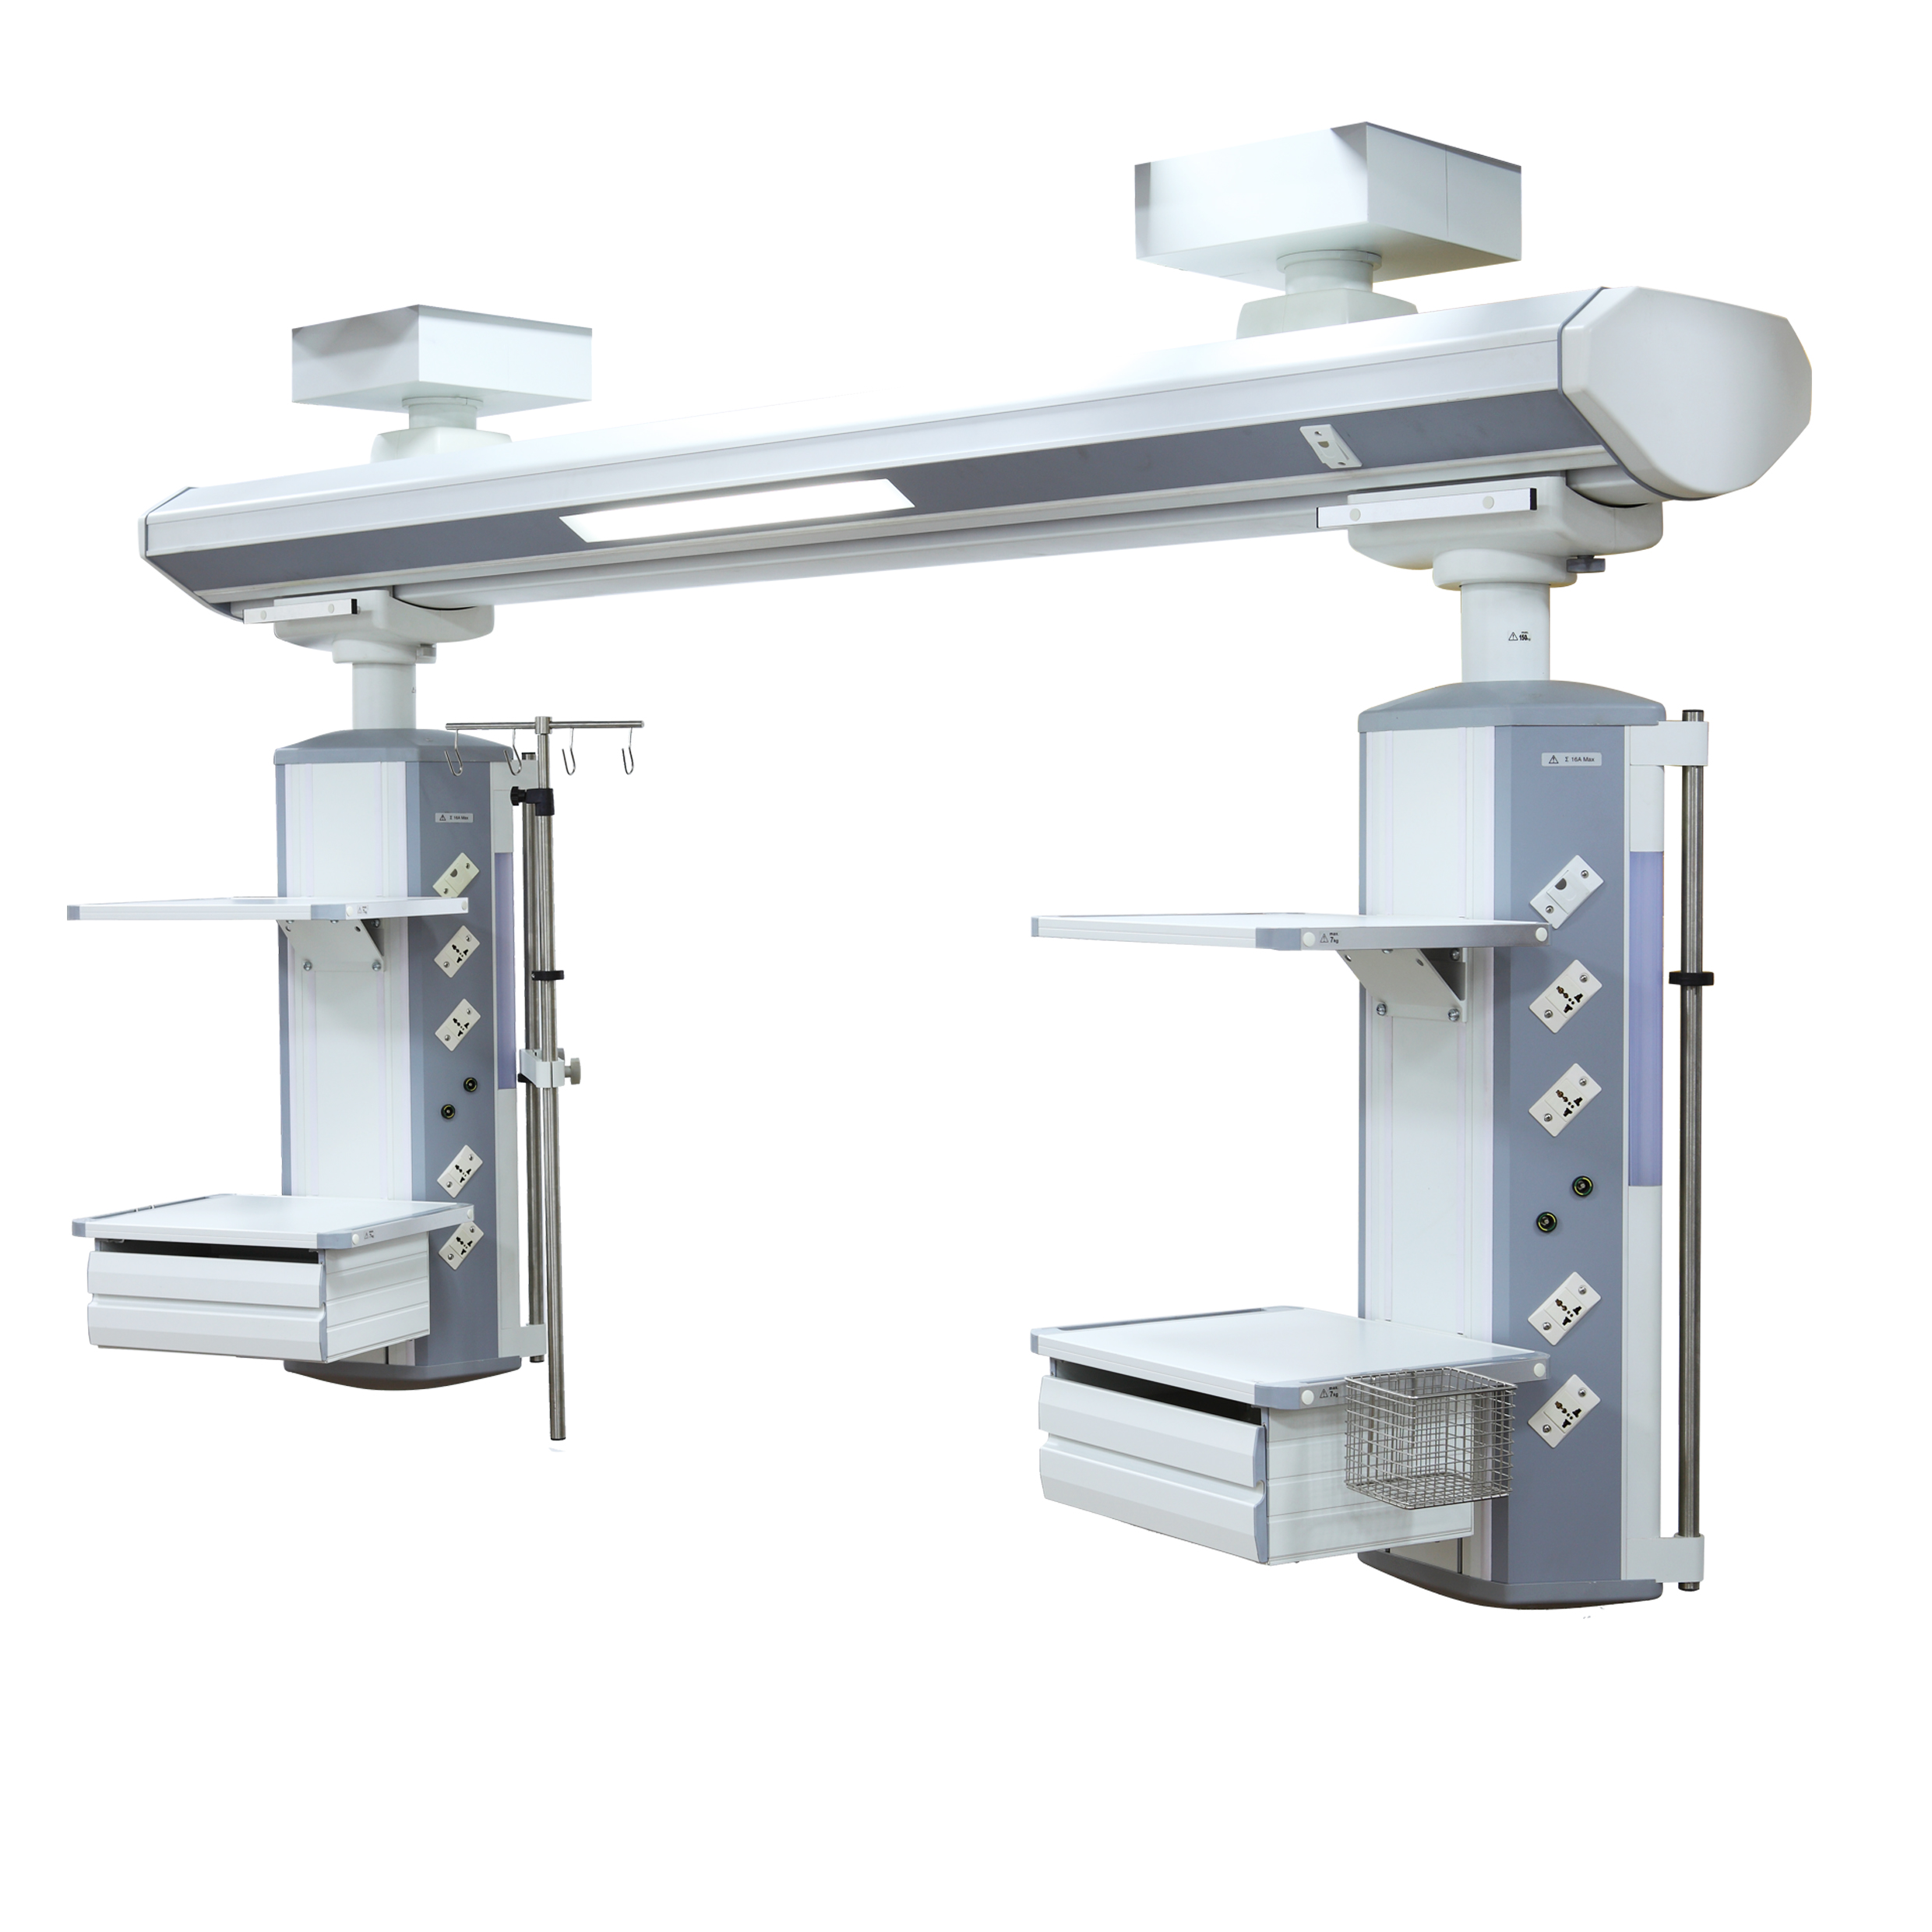 OEM/ODM Manufacturer Factory Equipment Operating Table - Multifunctional ICU Bridge Ceiling Mounted Pendant for Hospital Wards – Figton